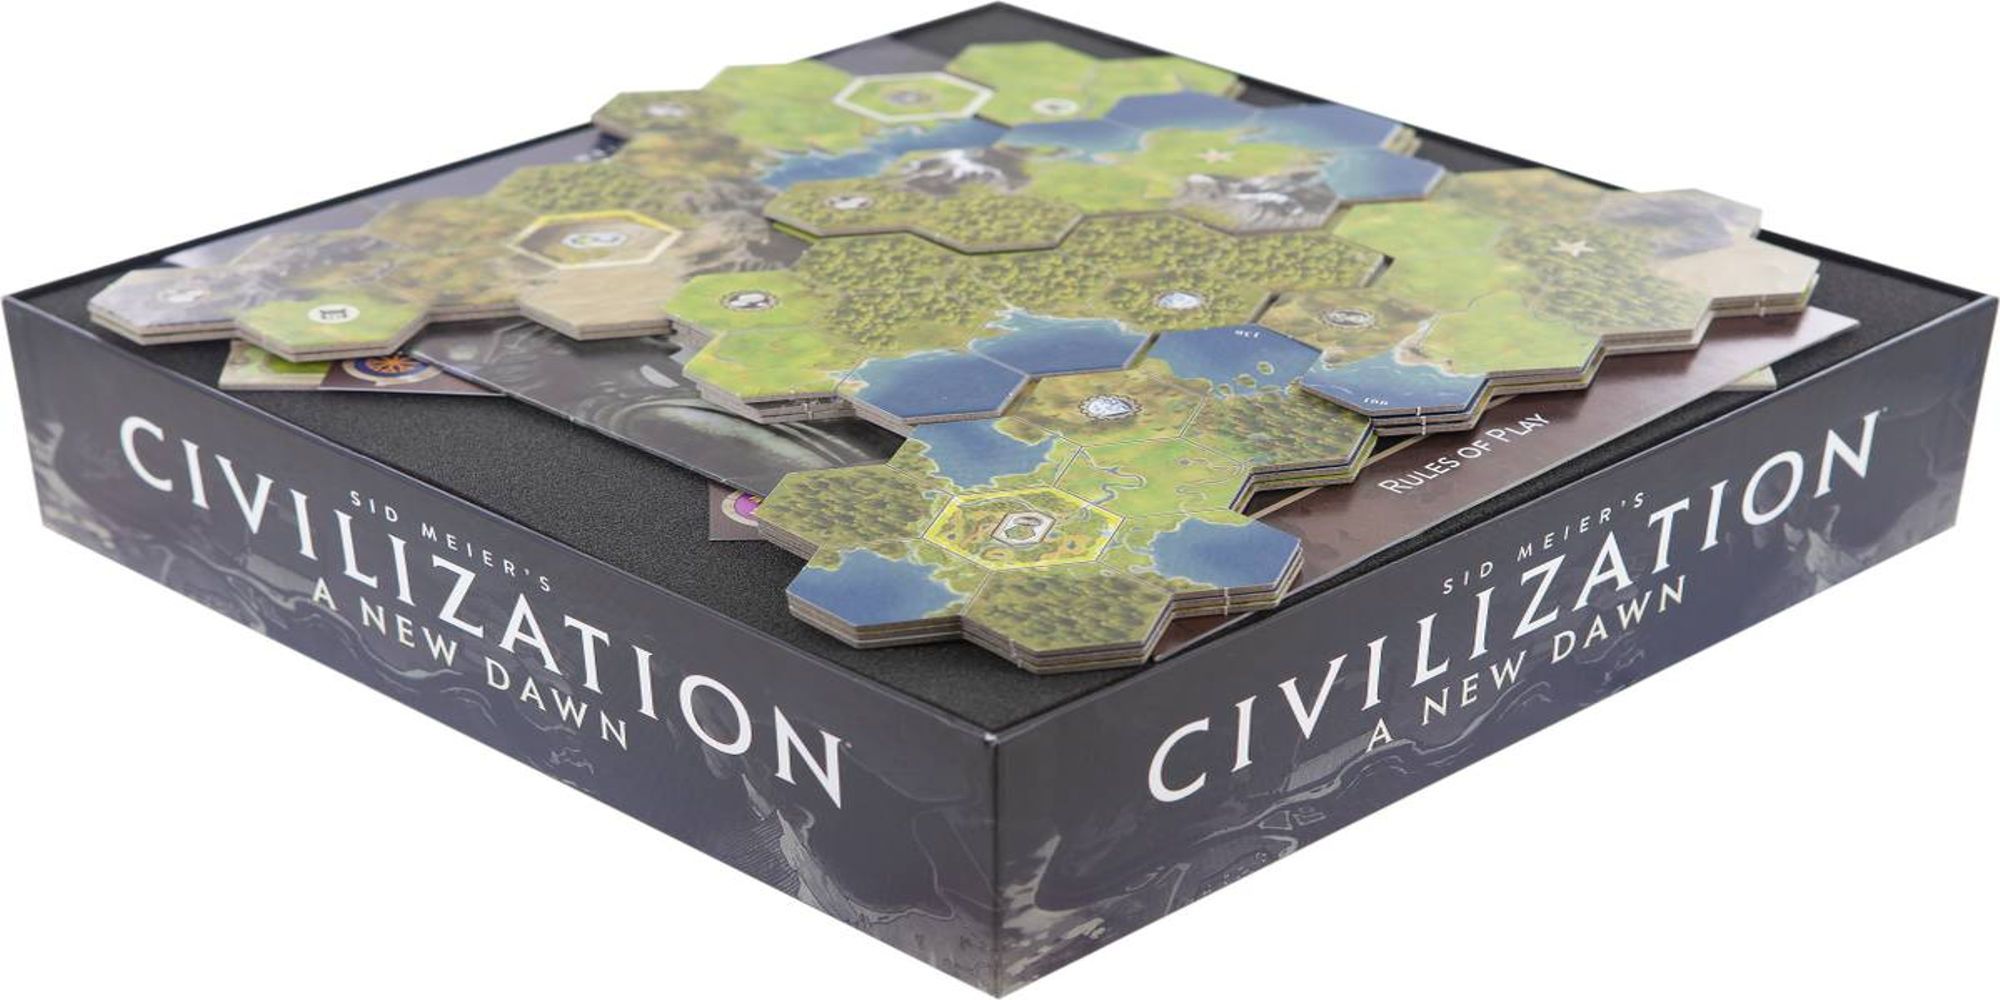 The game box with some terrain hexes on top of it